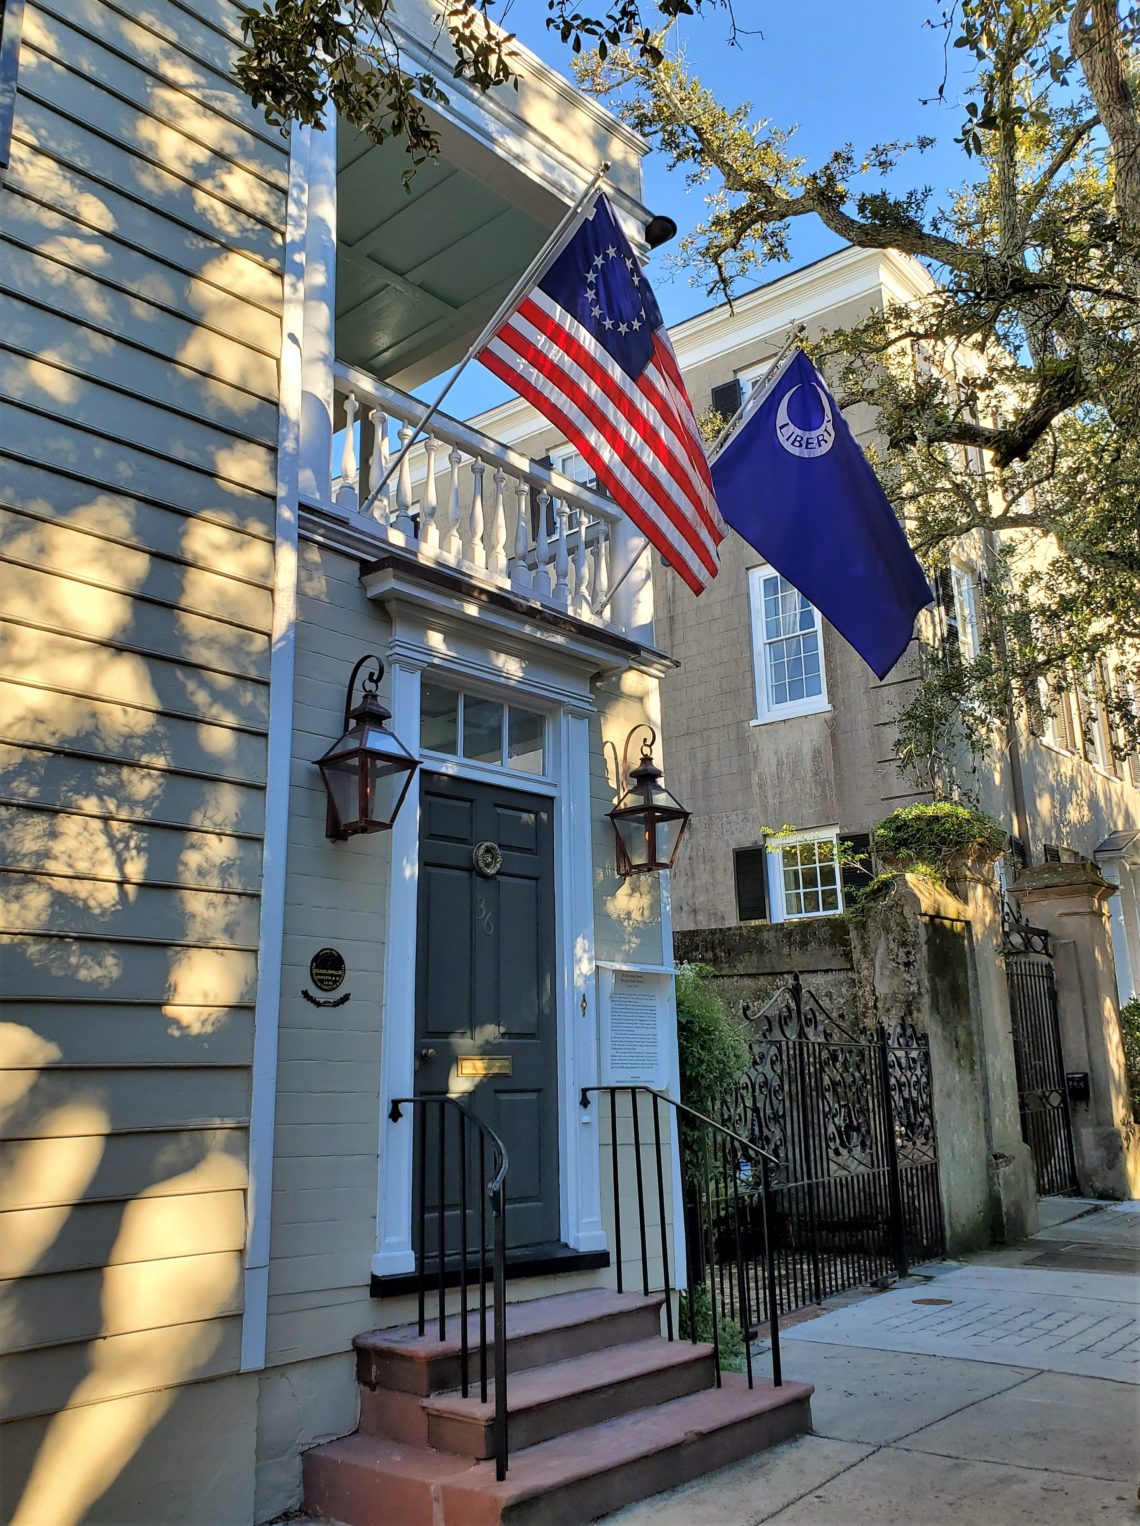 This beautiful house on Meeting Street, c.1740, is known for the original woodwork in its interior. The mantle is believed to have been created by Thomas Elfe, a famous Charleston cabinet maker.